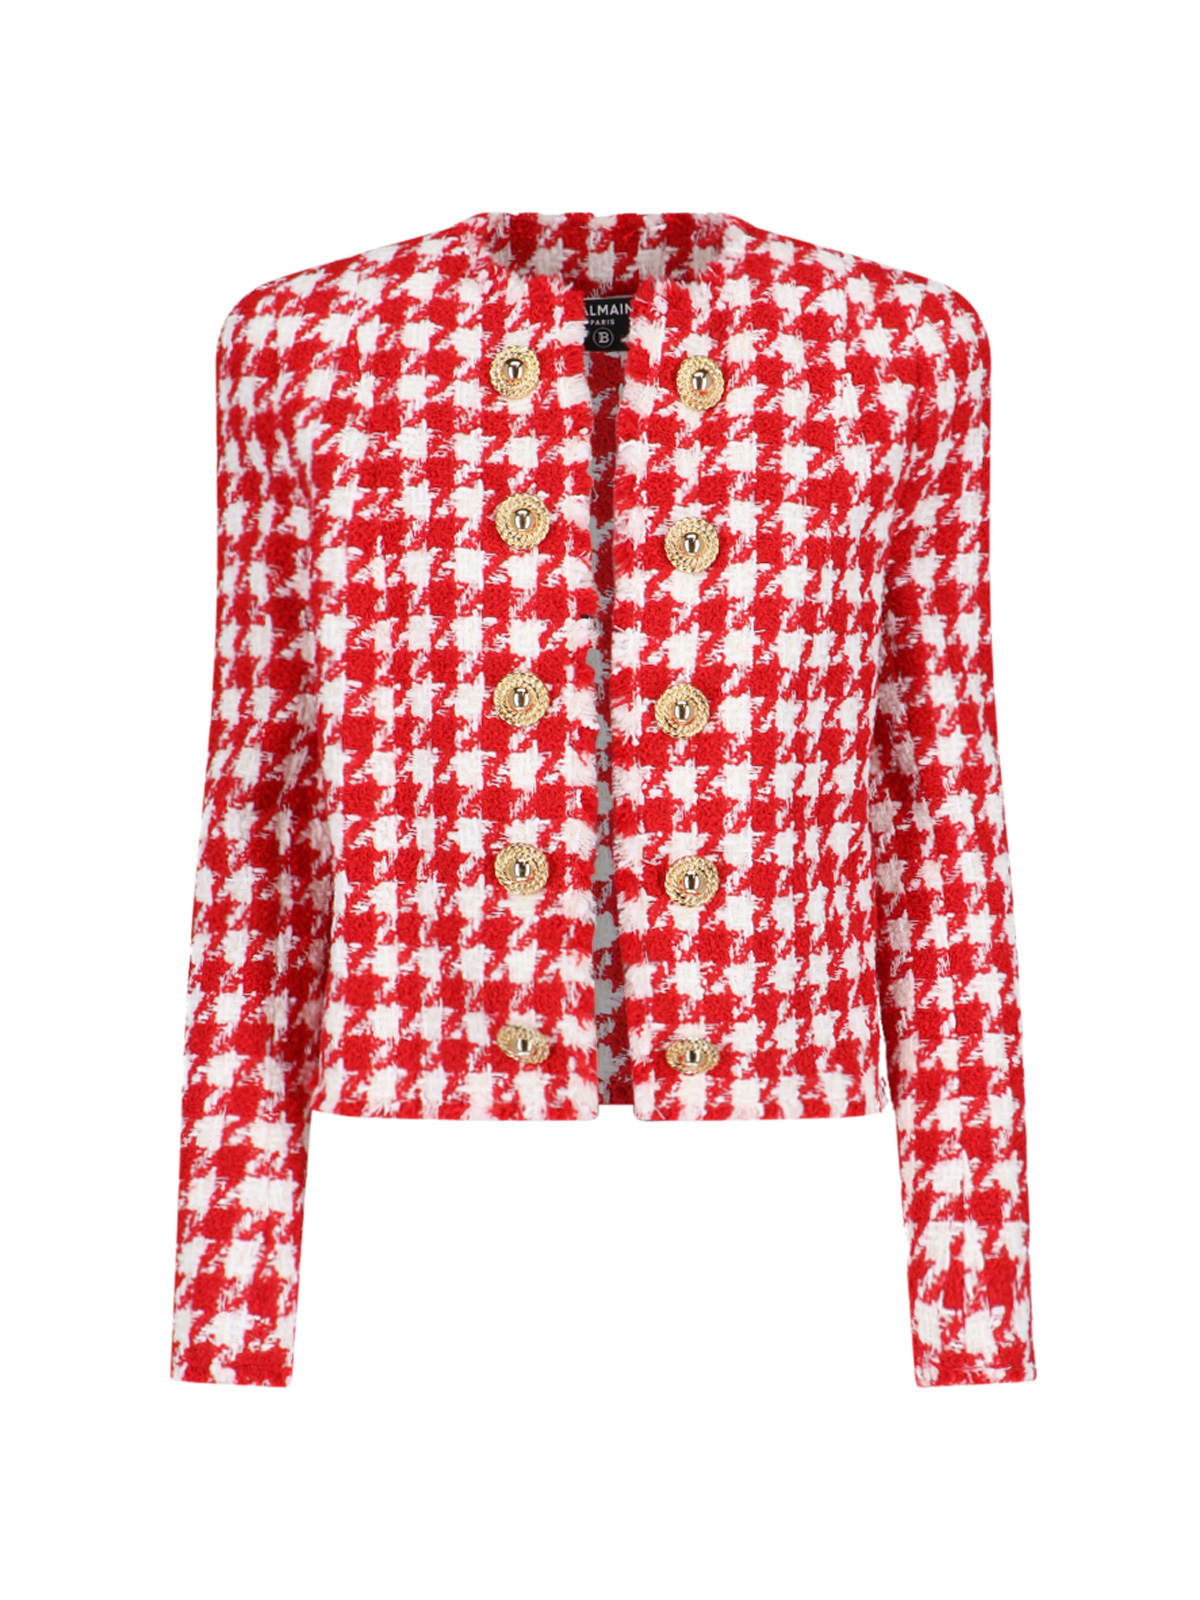 Balmain Houndstooth Jacket In Red